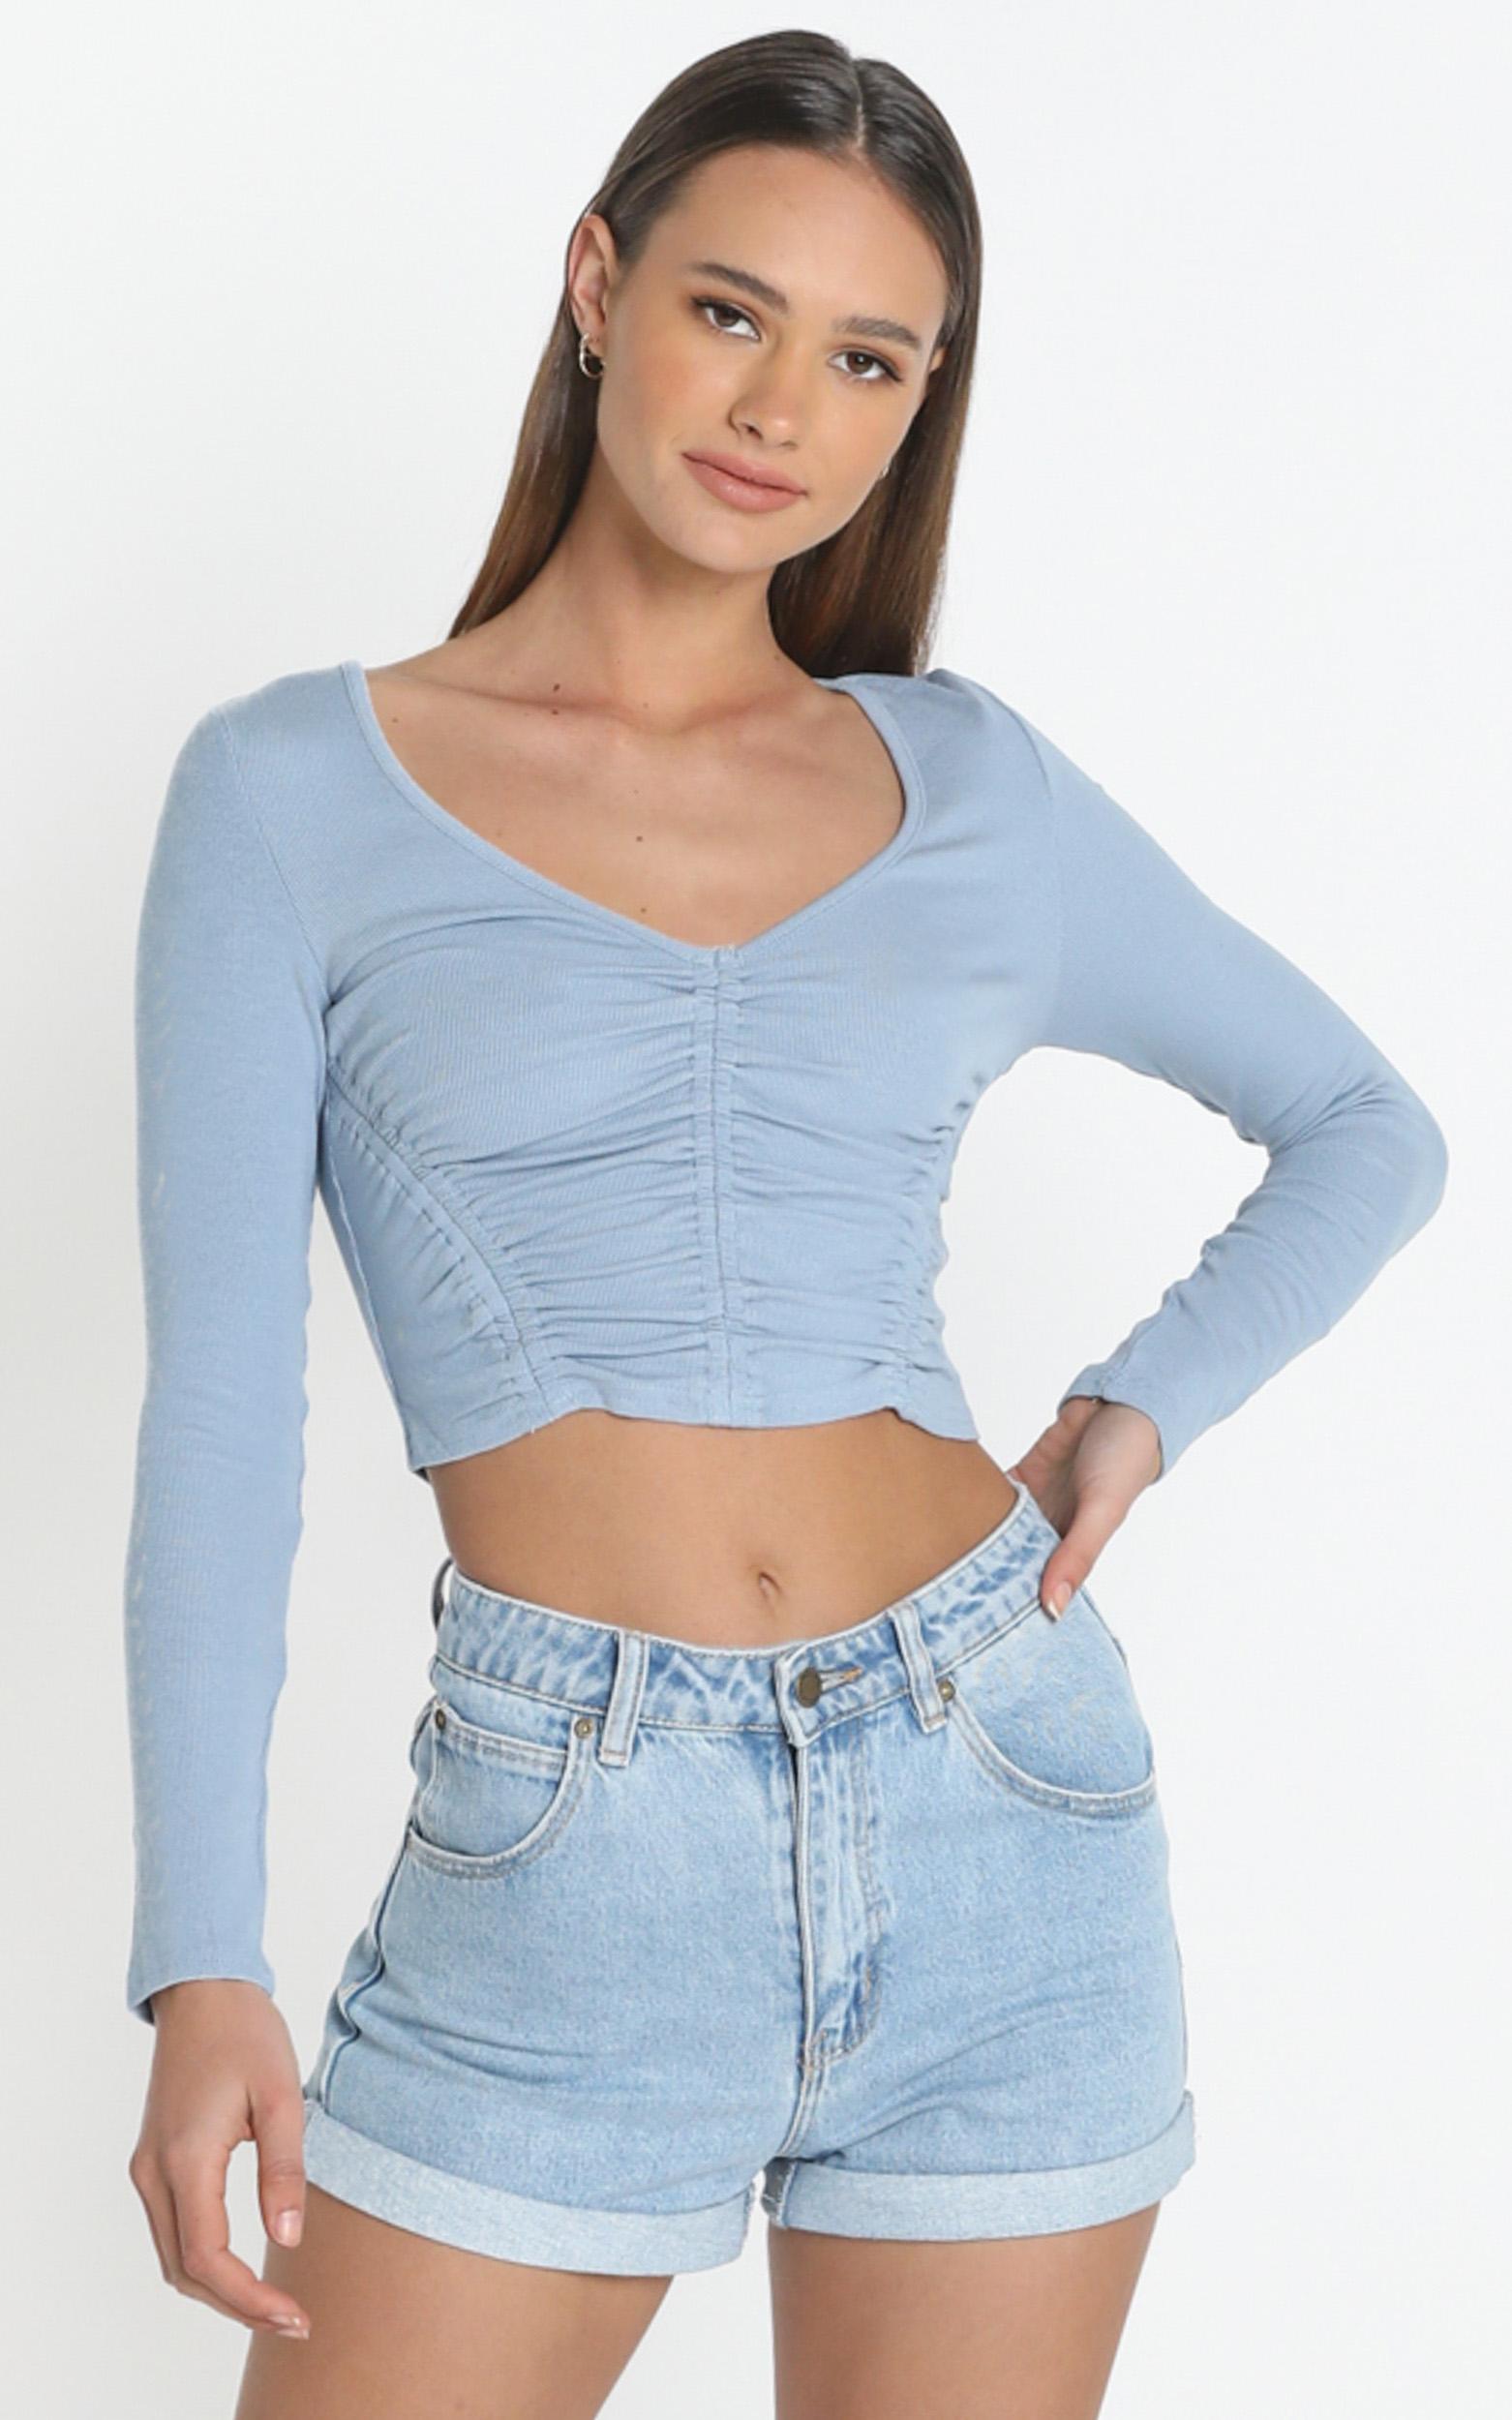 Jericho Top in Baby Blue - 12 (L), Blue, hi-res image number null